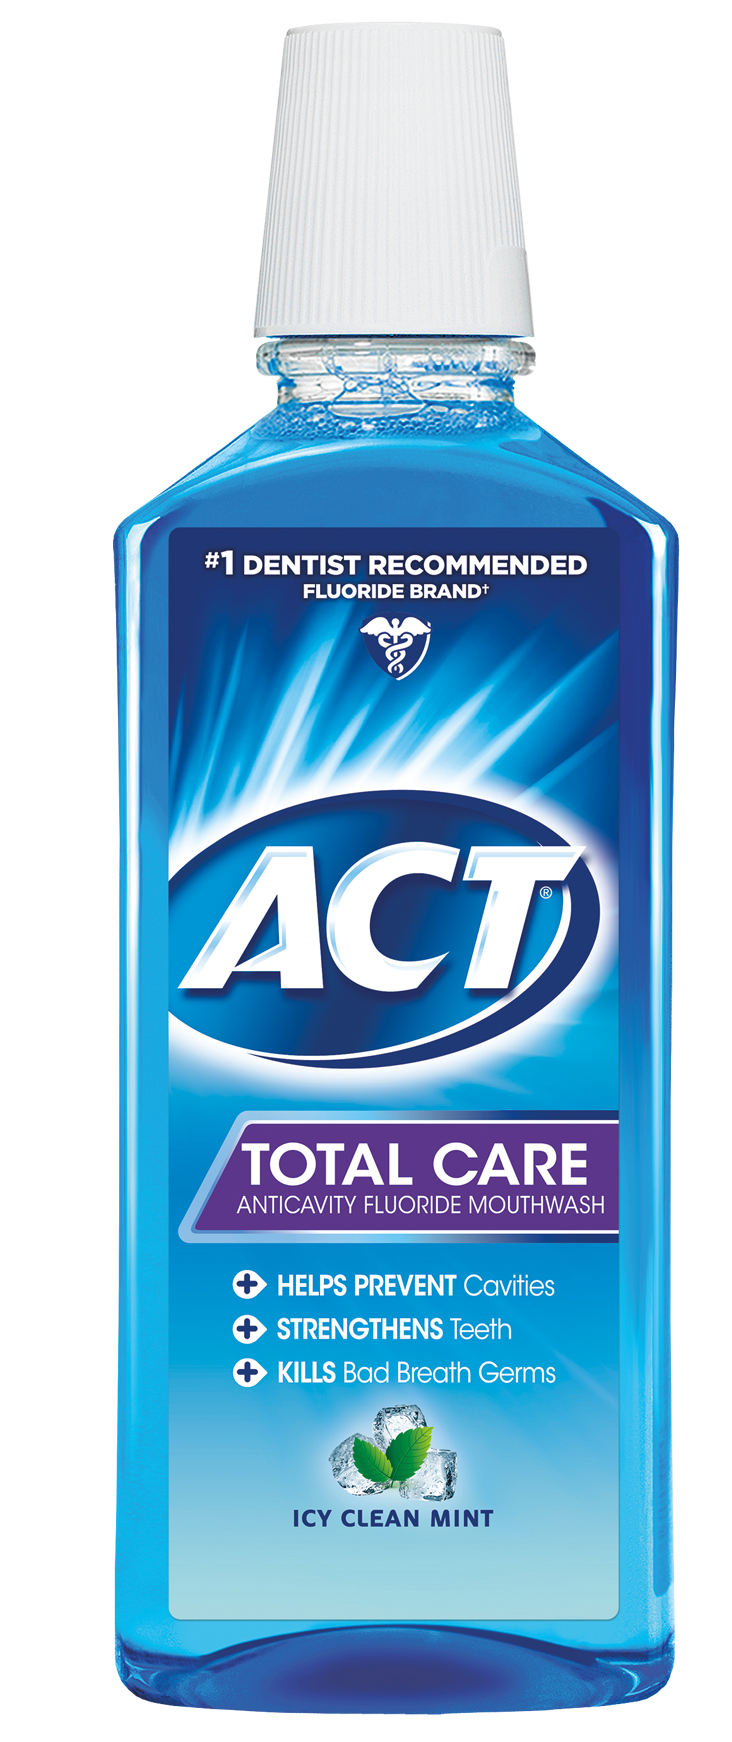 ACT® Icy Clean Mint Total Care Anticavity Fluoride Mouthwash